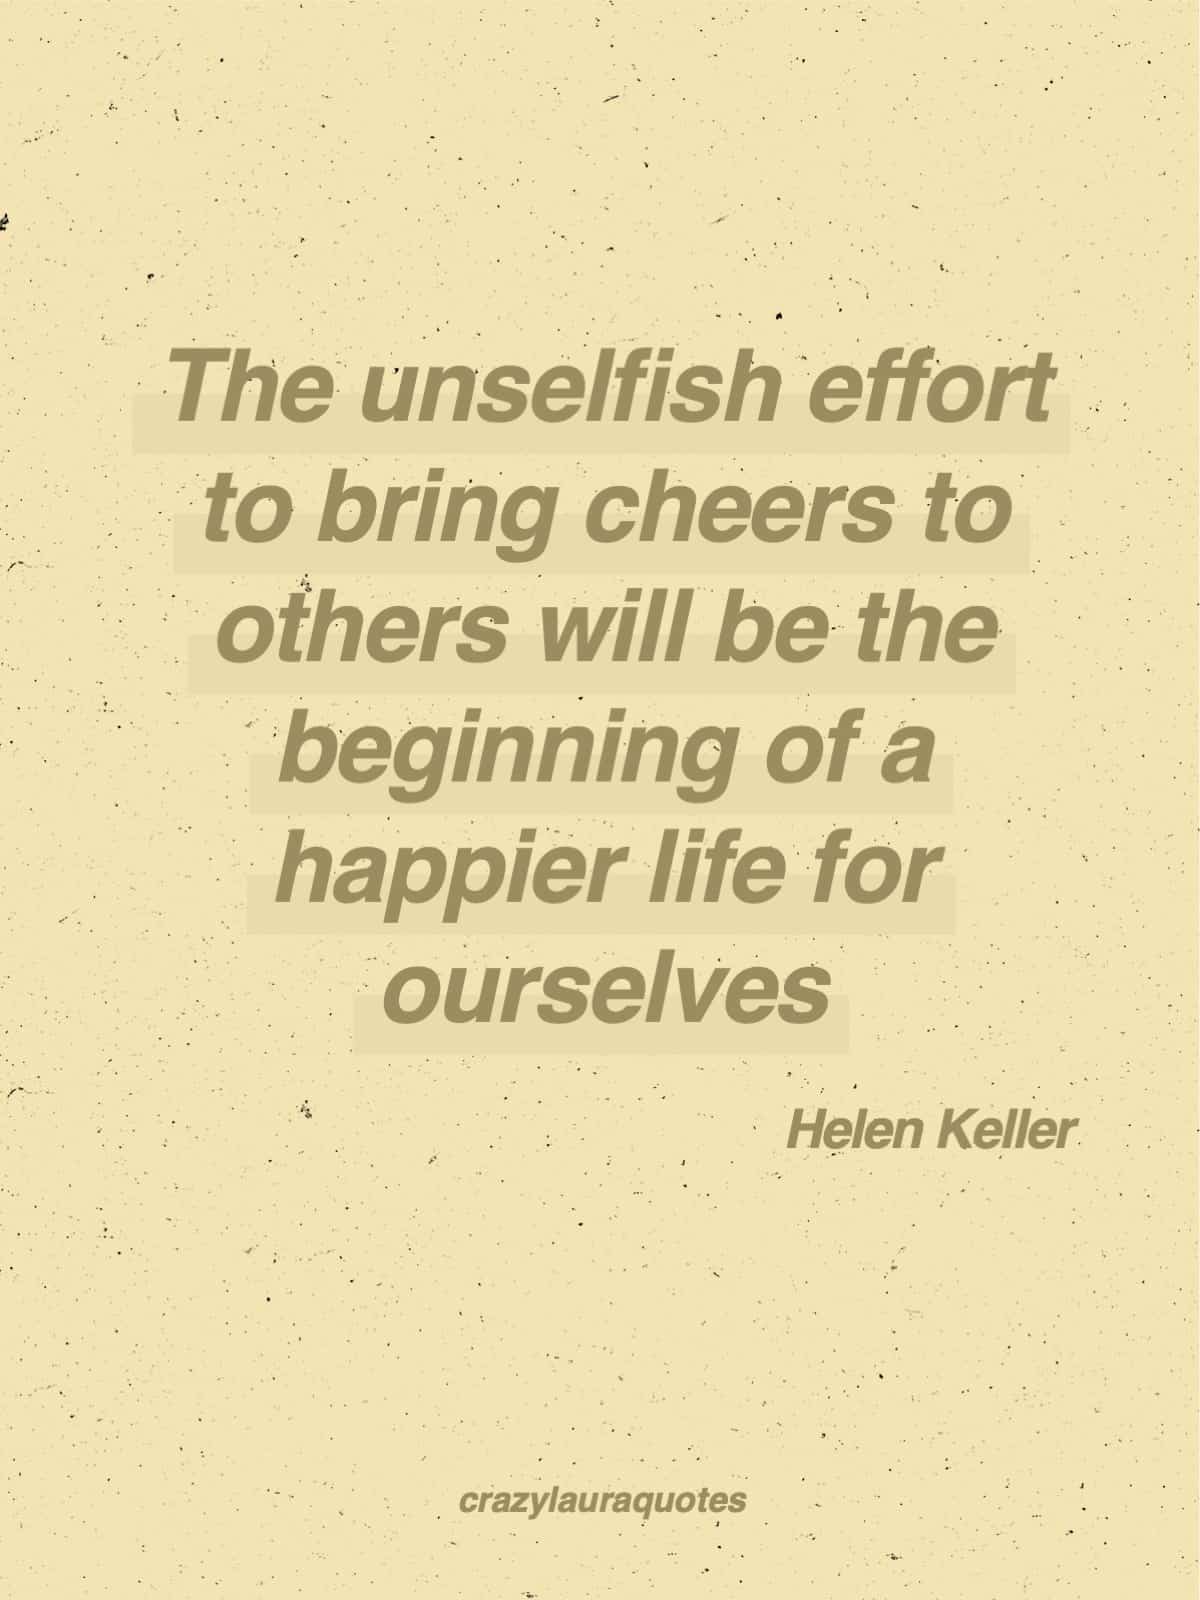 give to others for a happier life helen keller